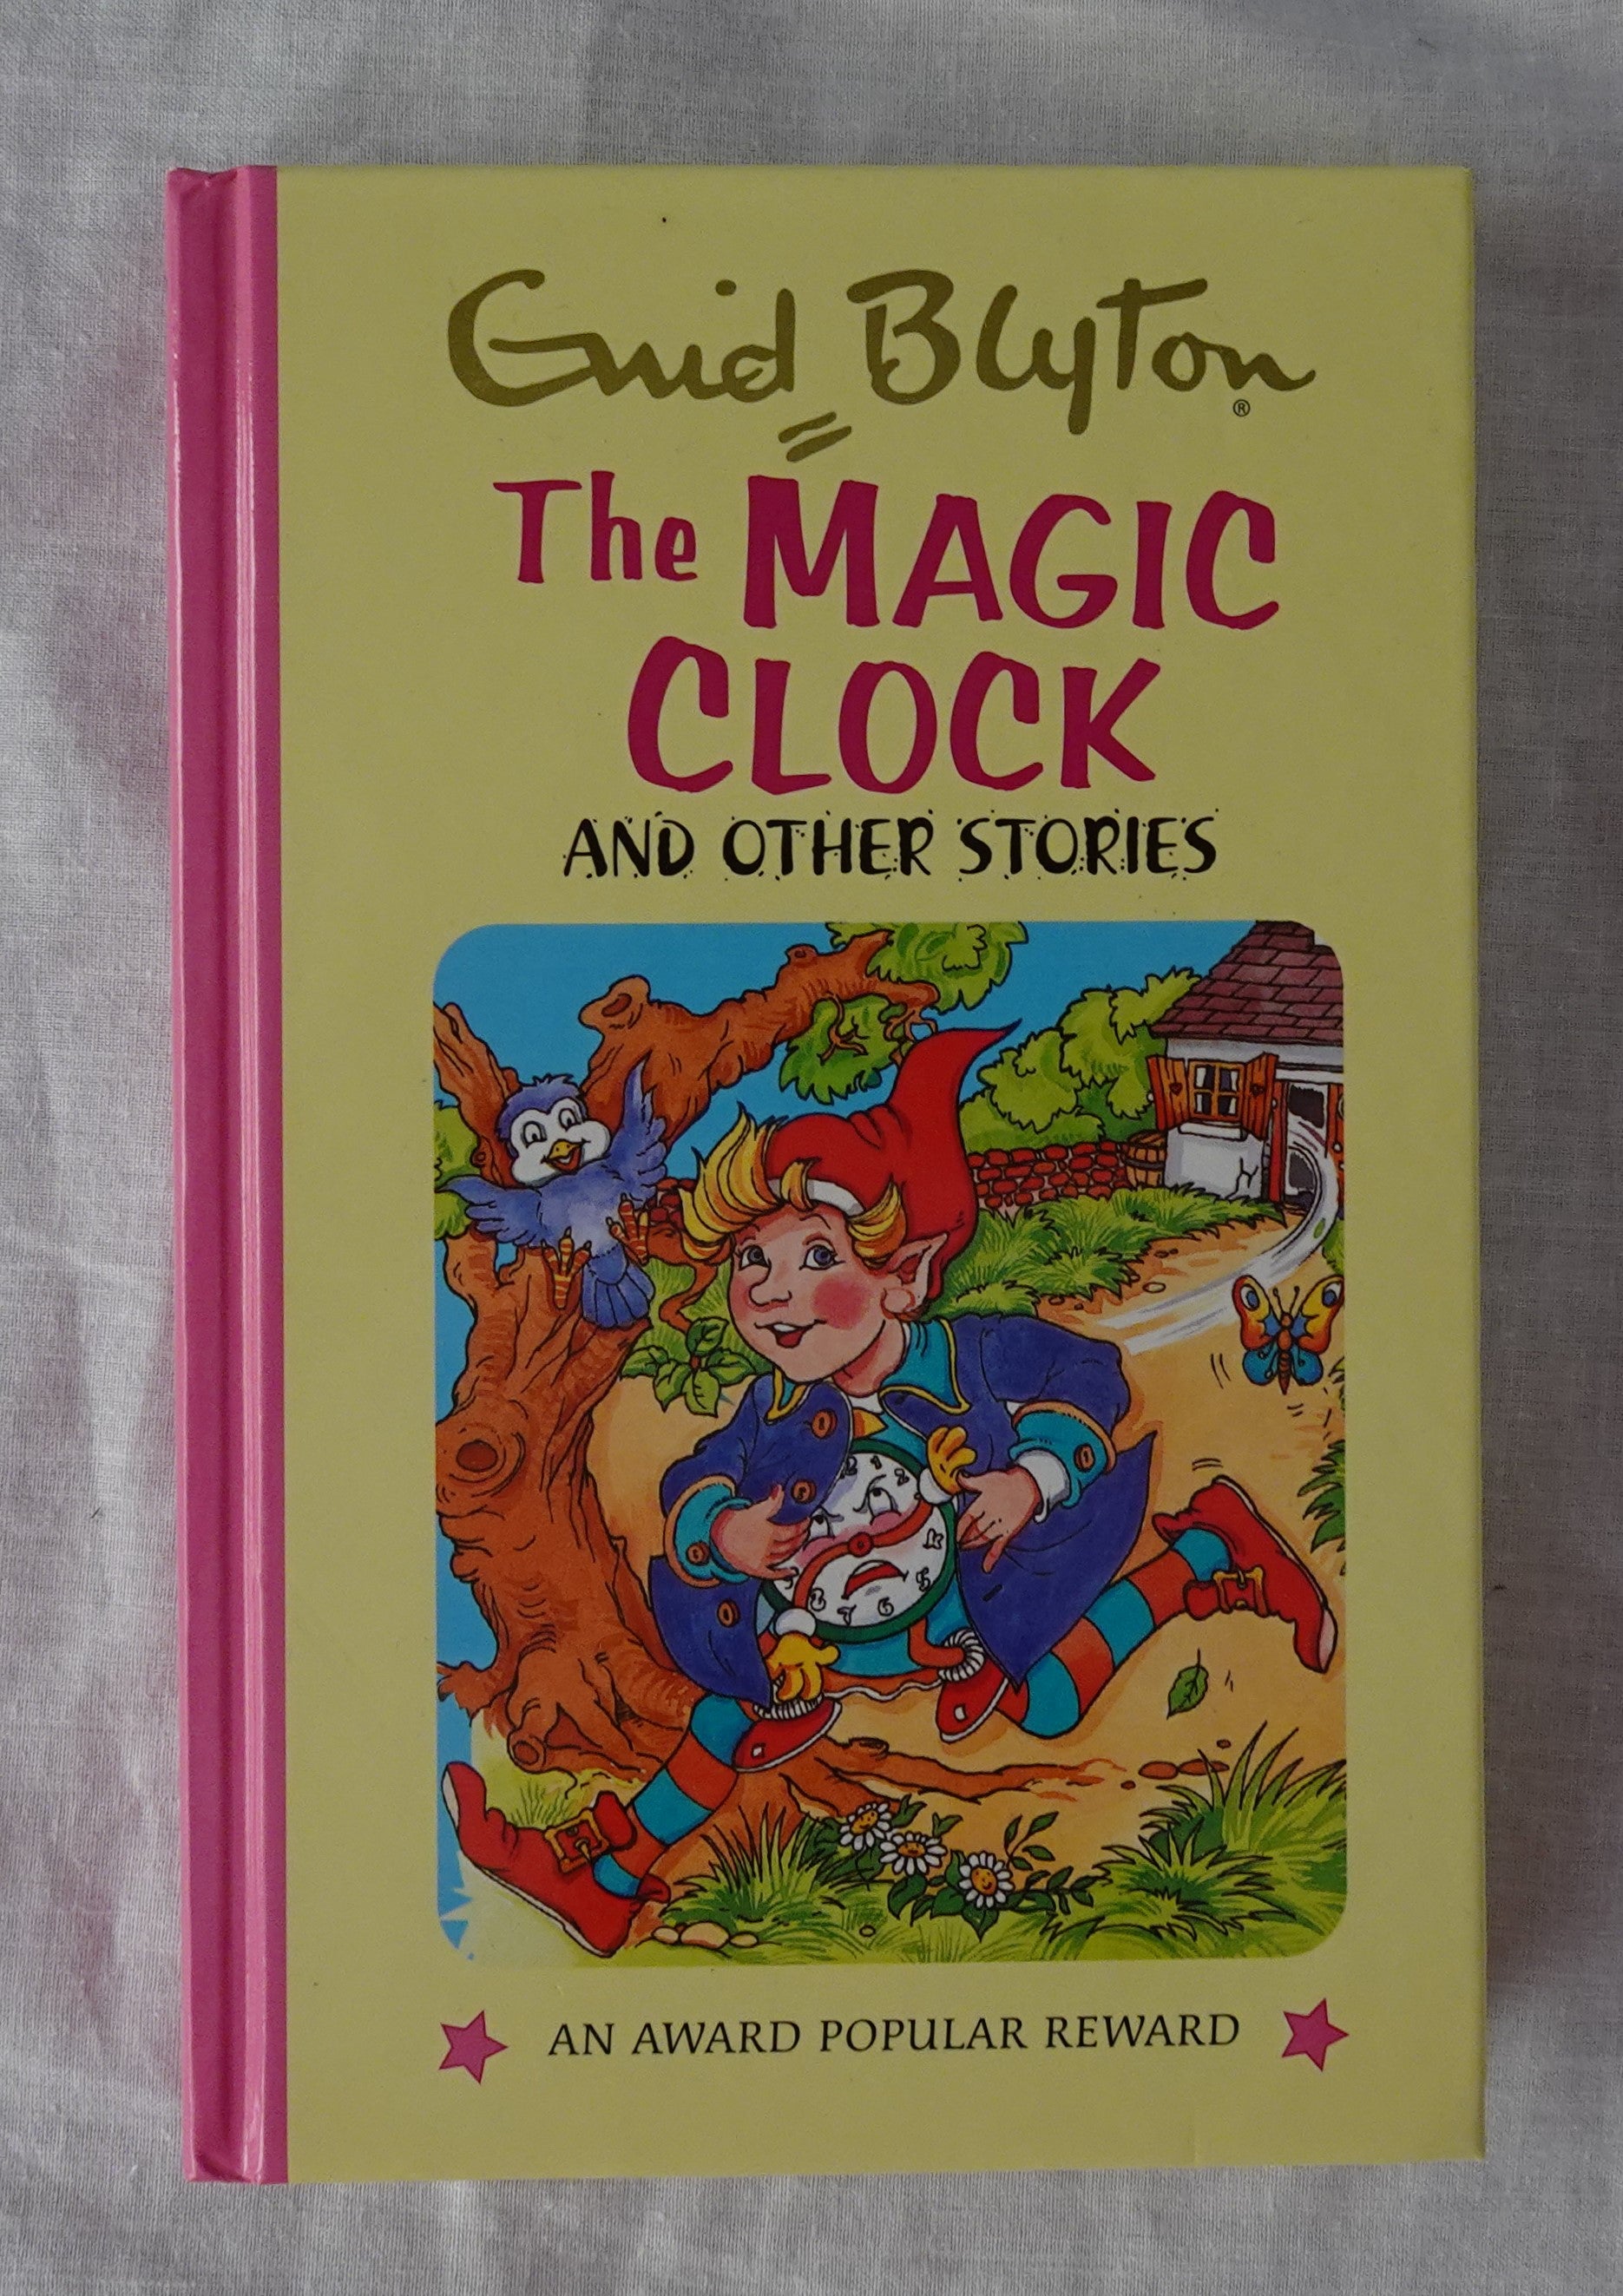 The Magic Clock and Other Stories  by Enid Blyton  Illustrated by Sara Silcock